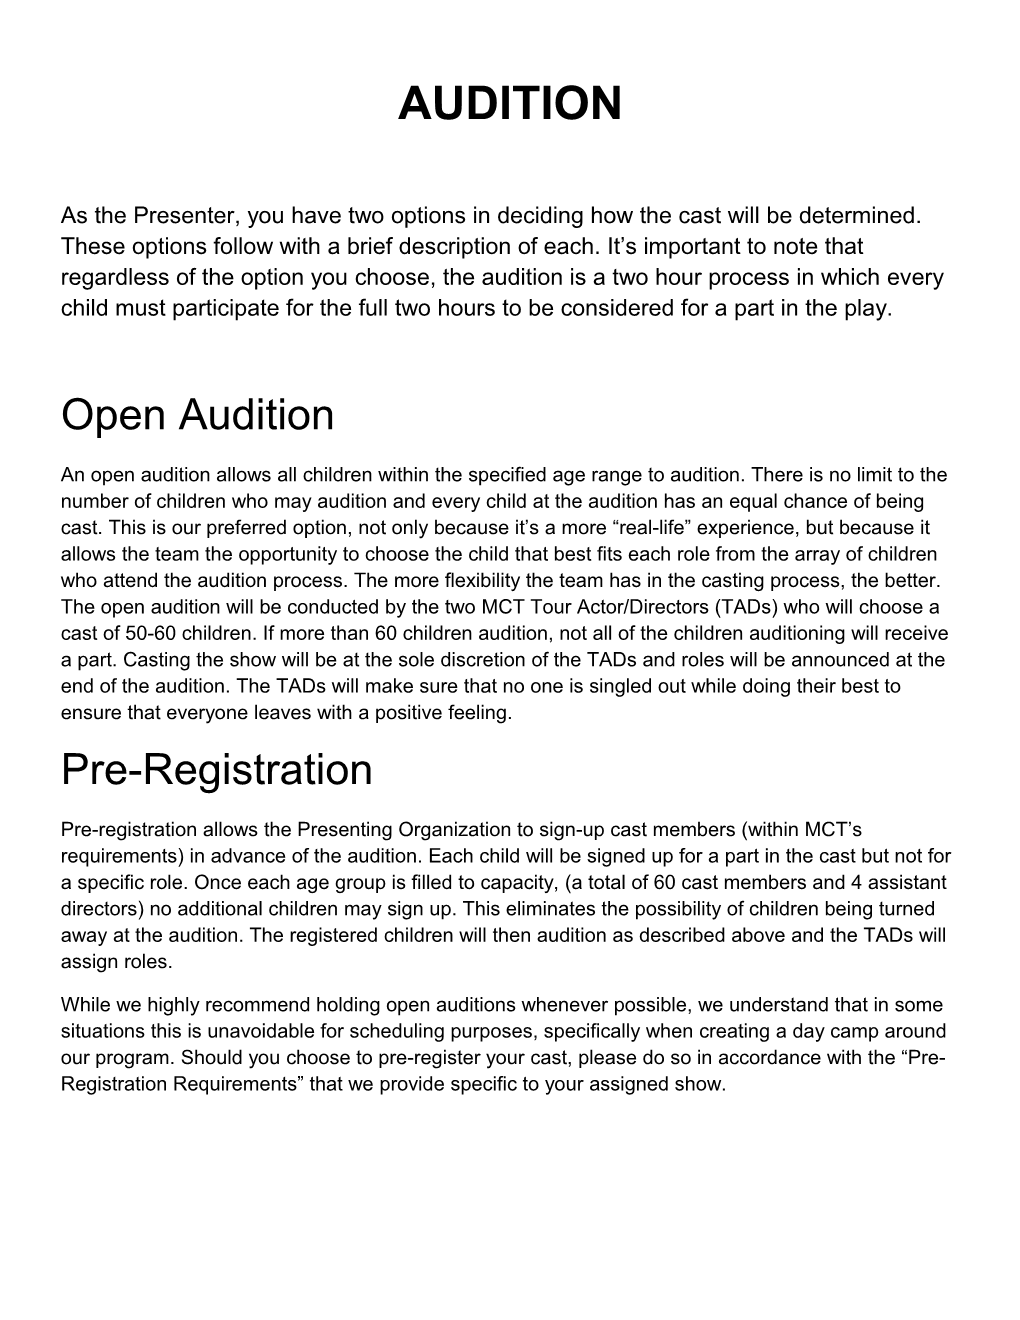 Open Audition